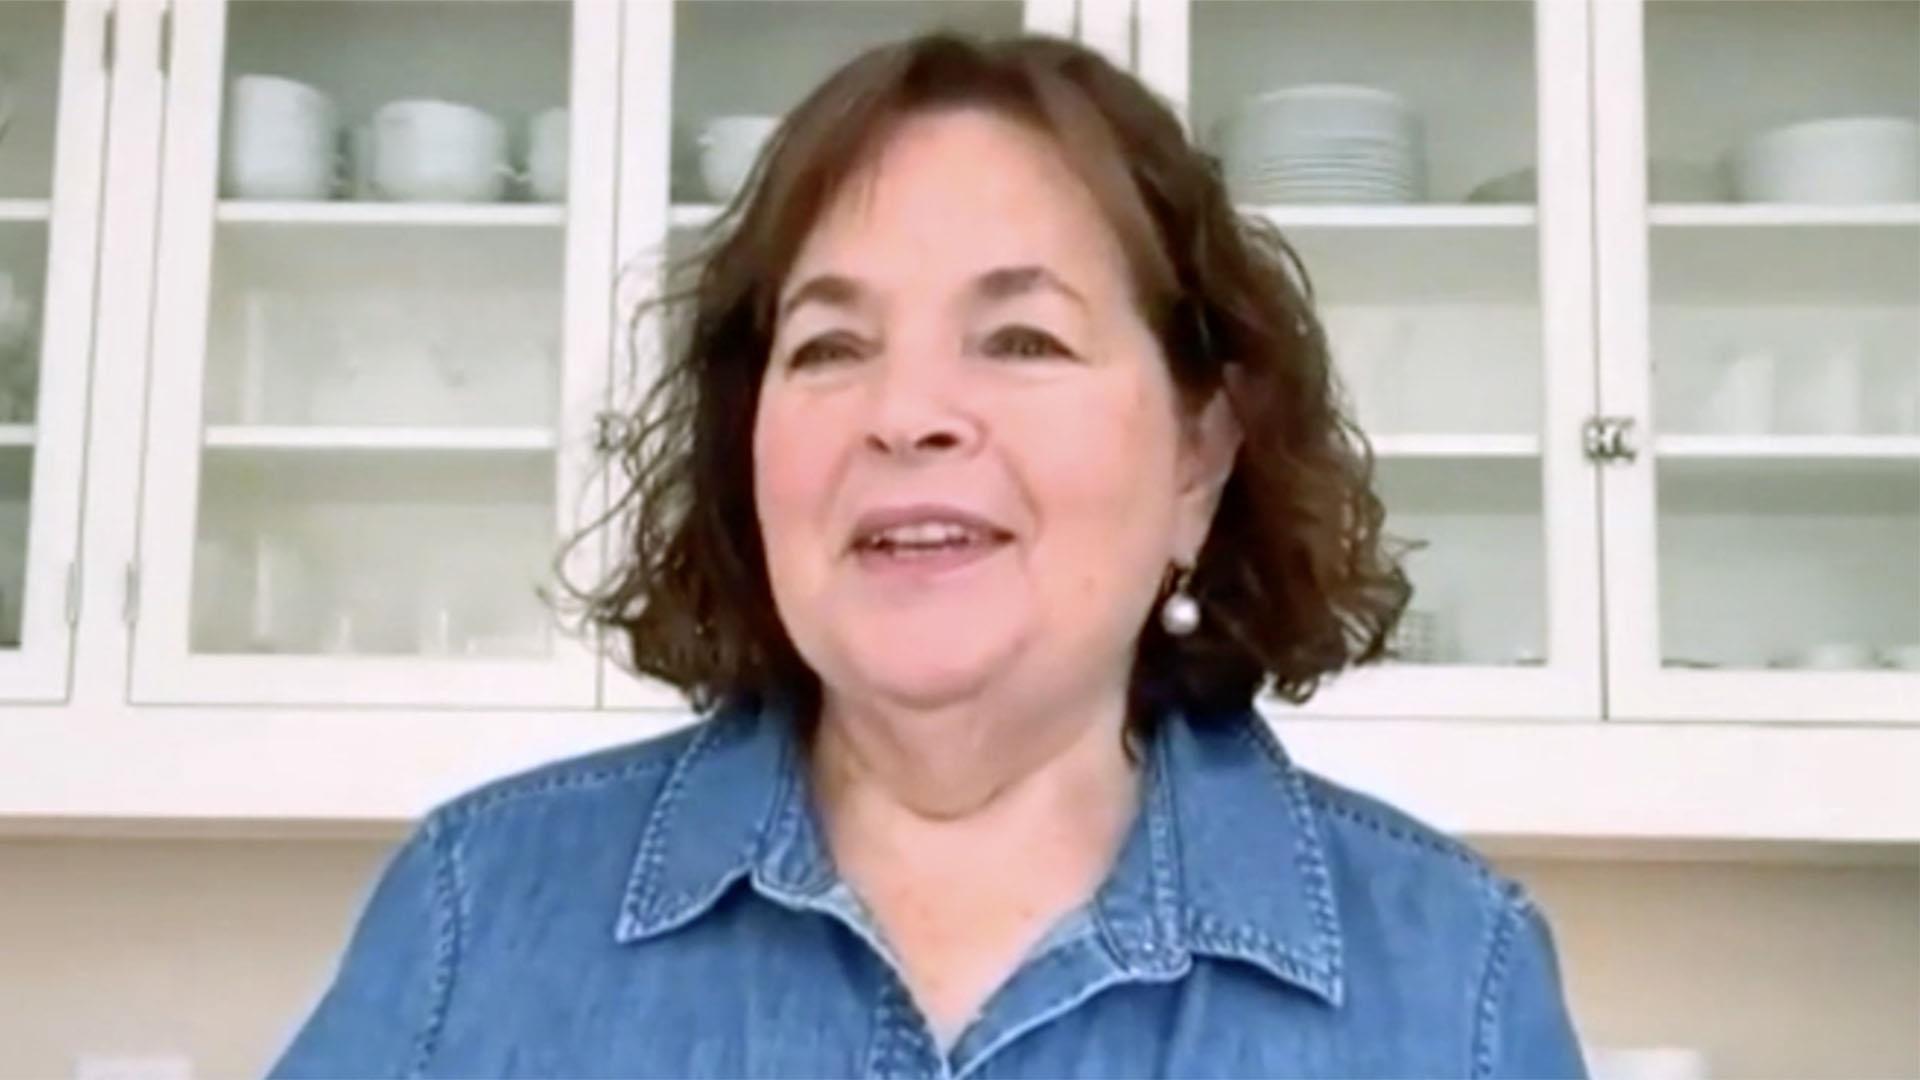 Ina Garten on early struggles during quarantine: ‘I lost the reason why ...